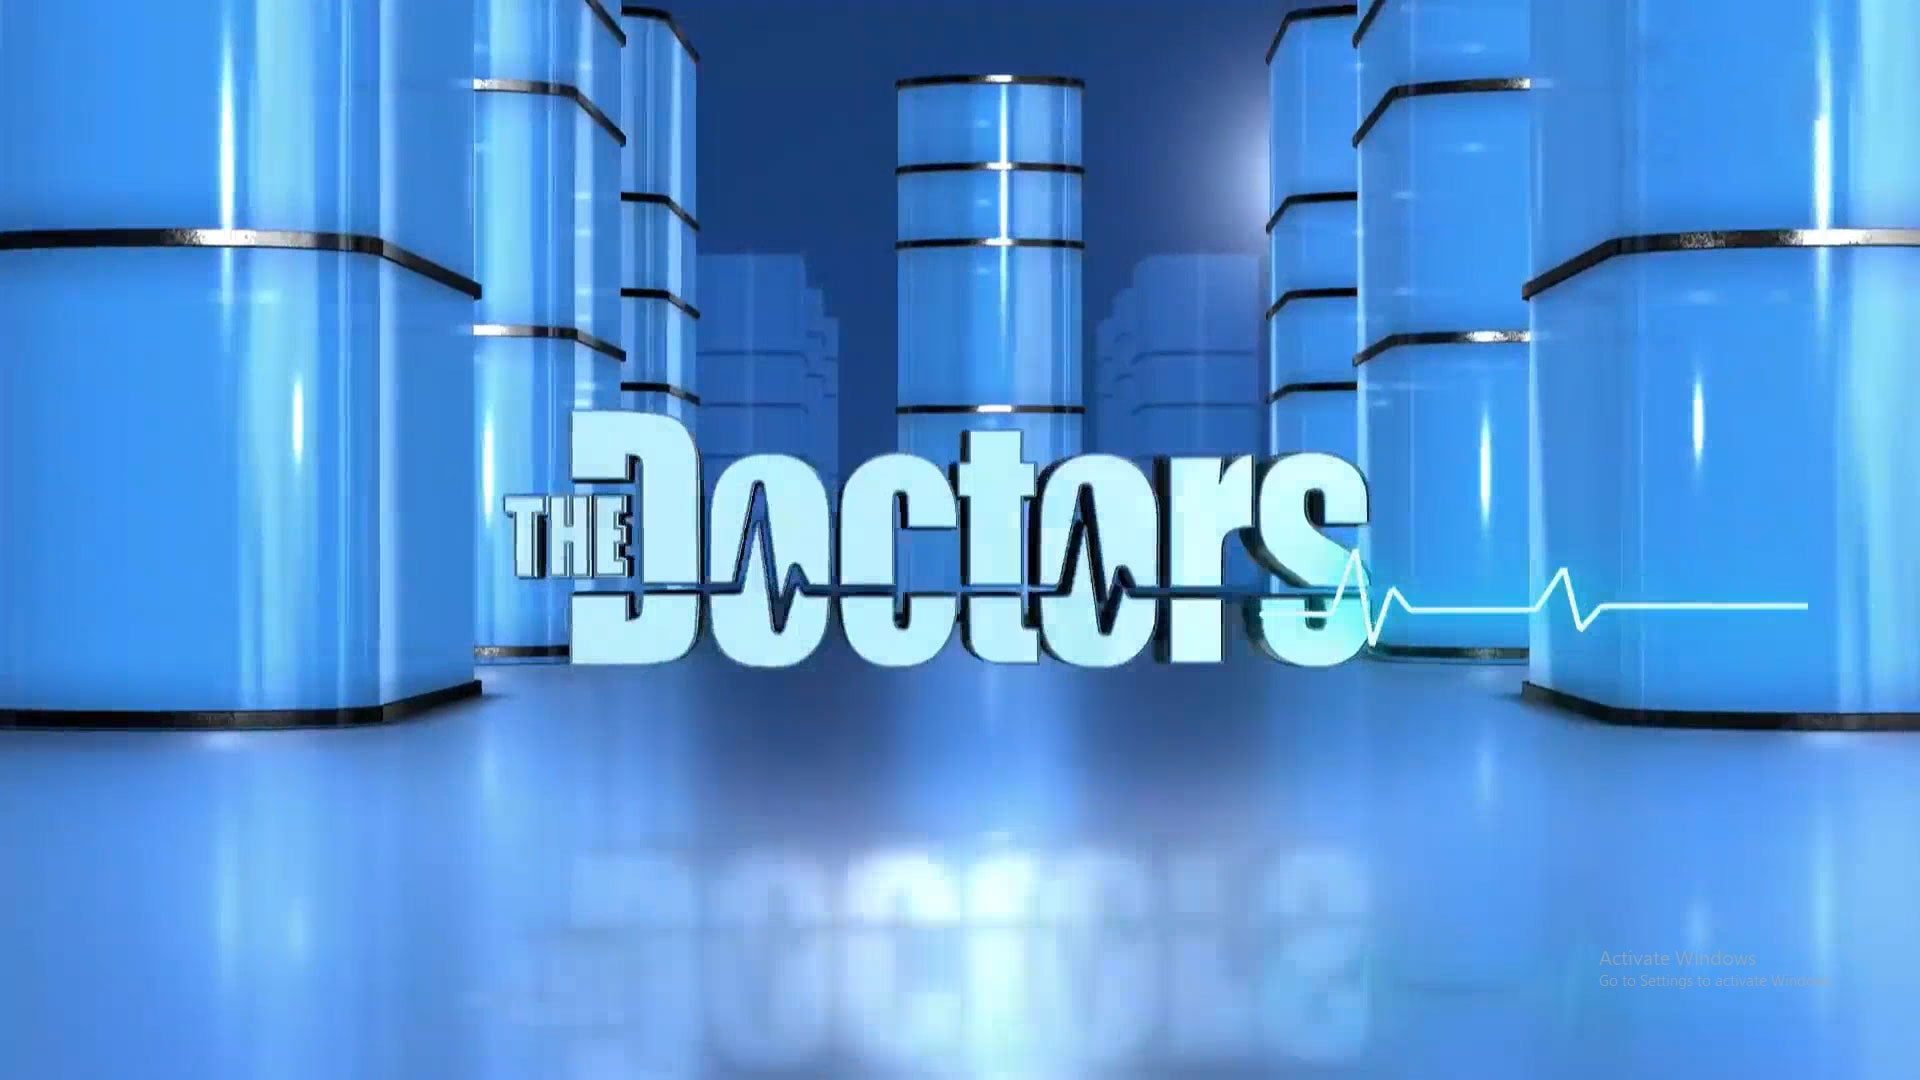 The Doctors show